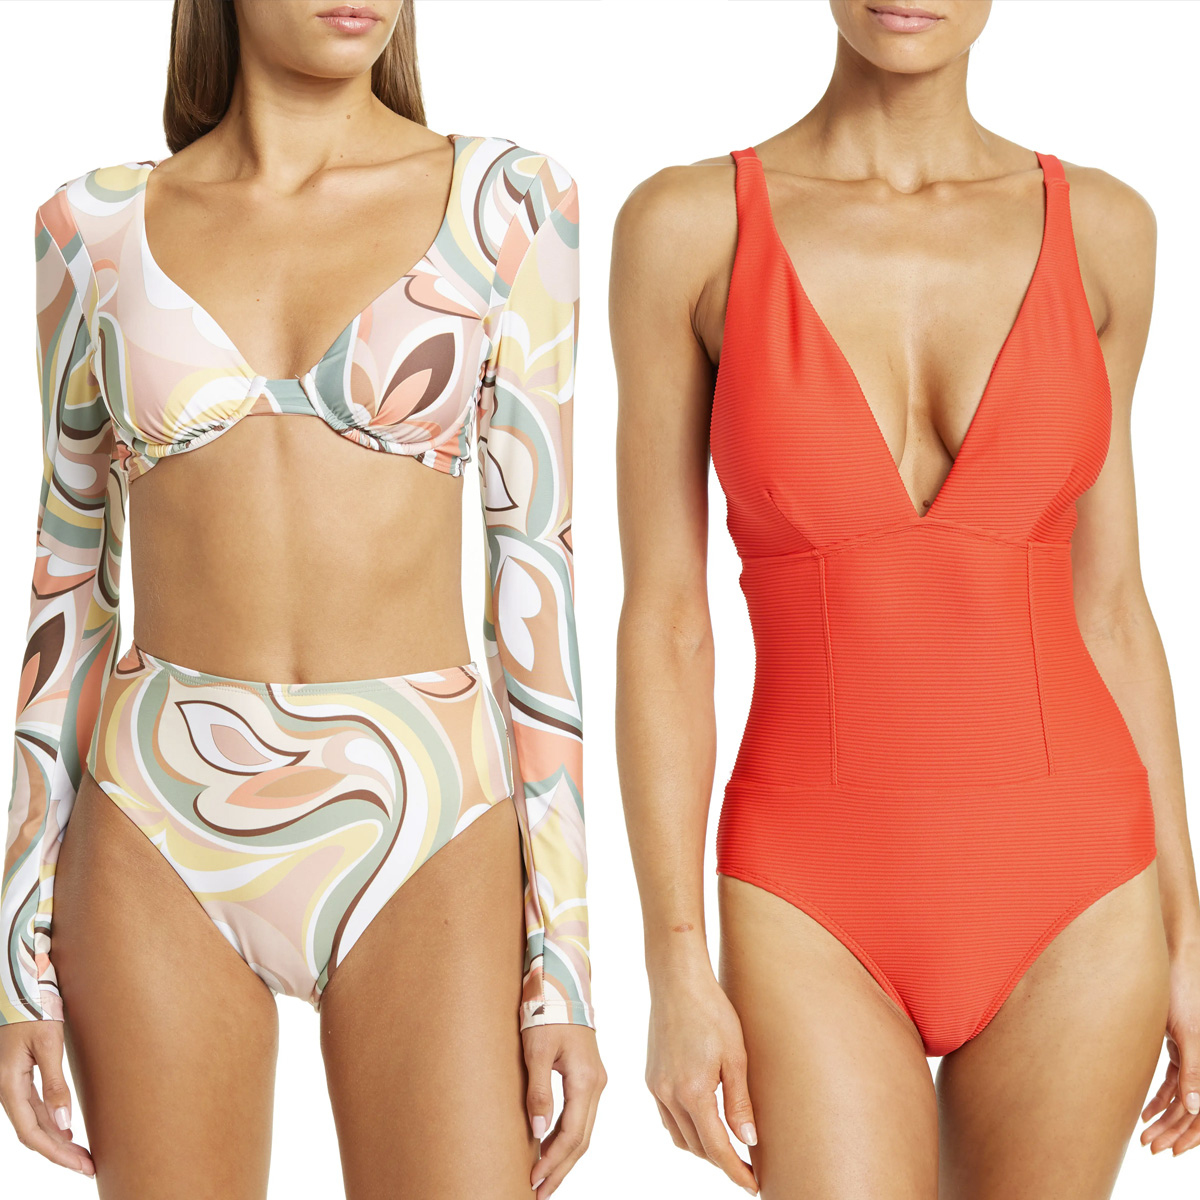 Nordstrom Rack Swimsuit Deals up to 78% Off: Styles Start at $20